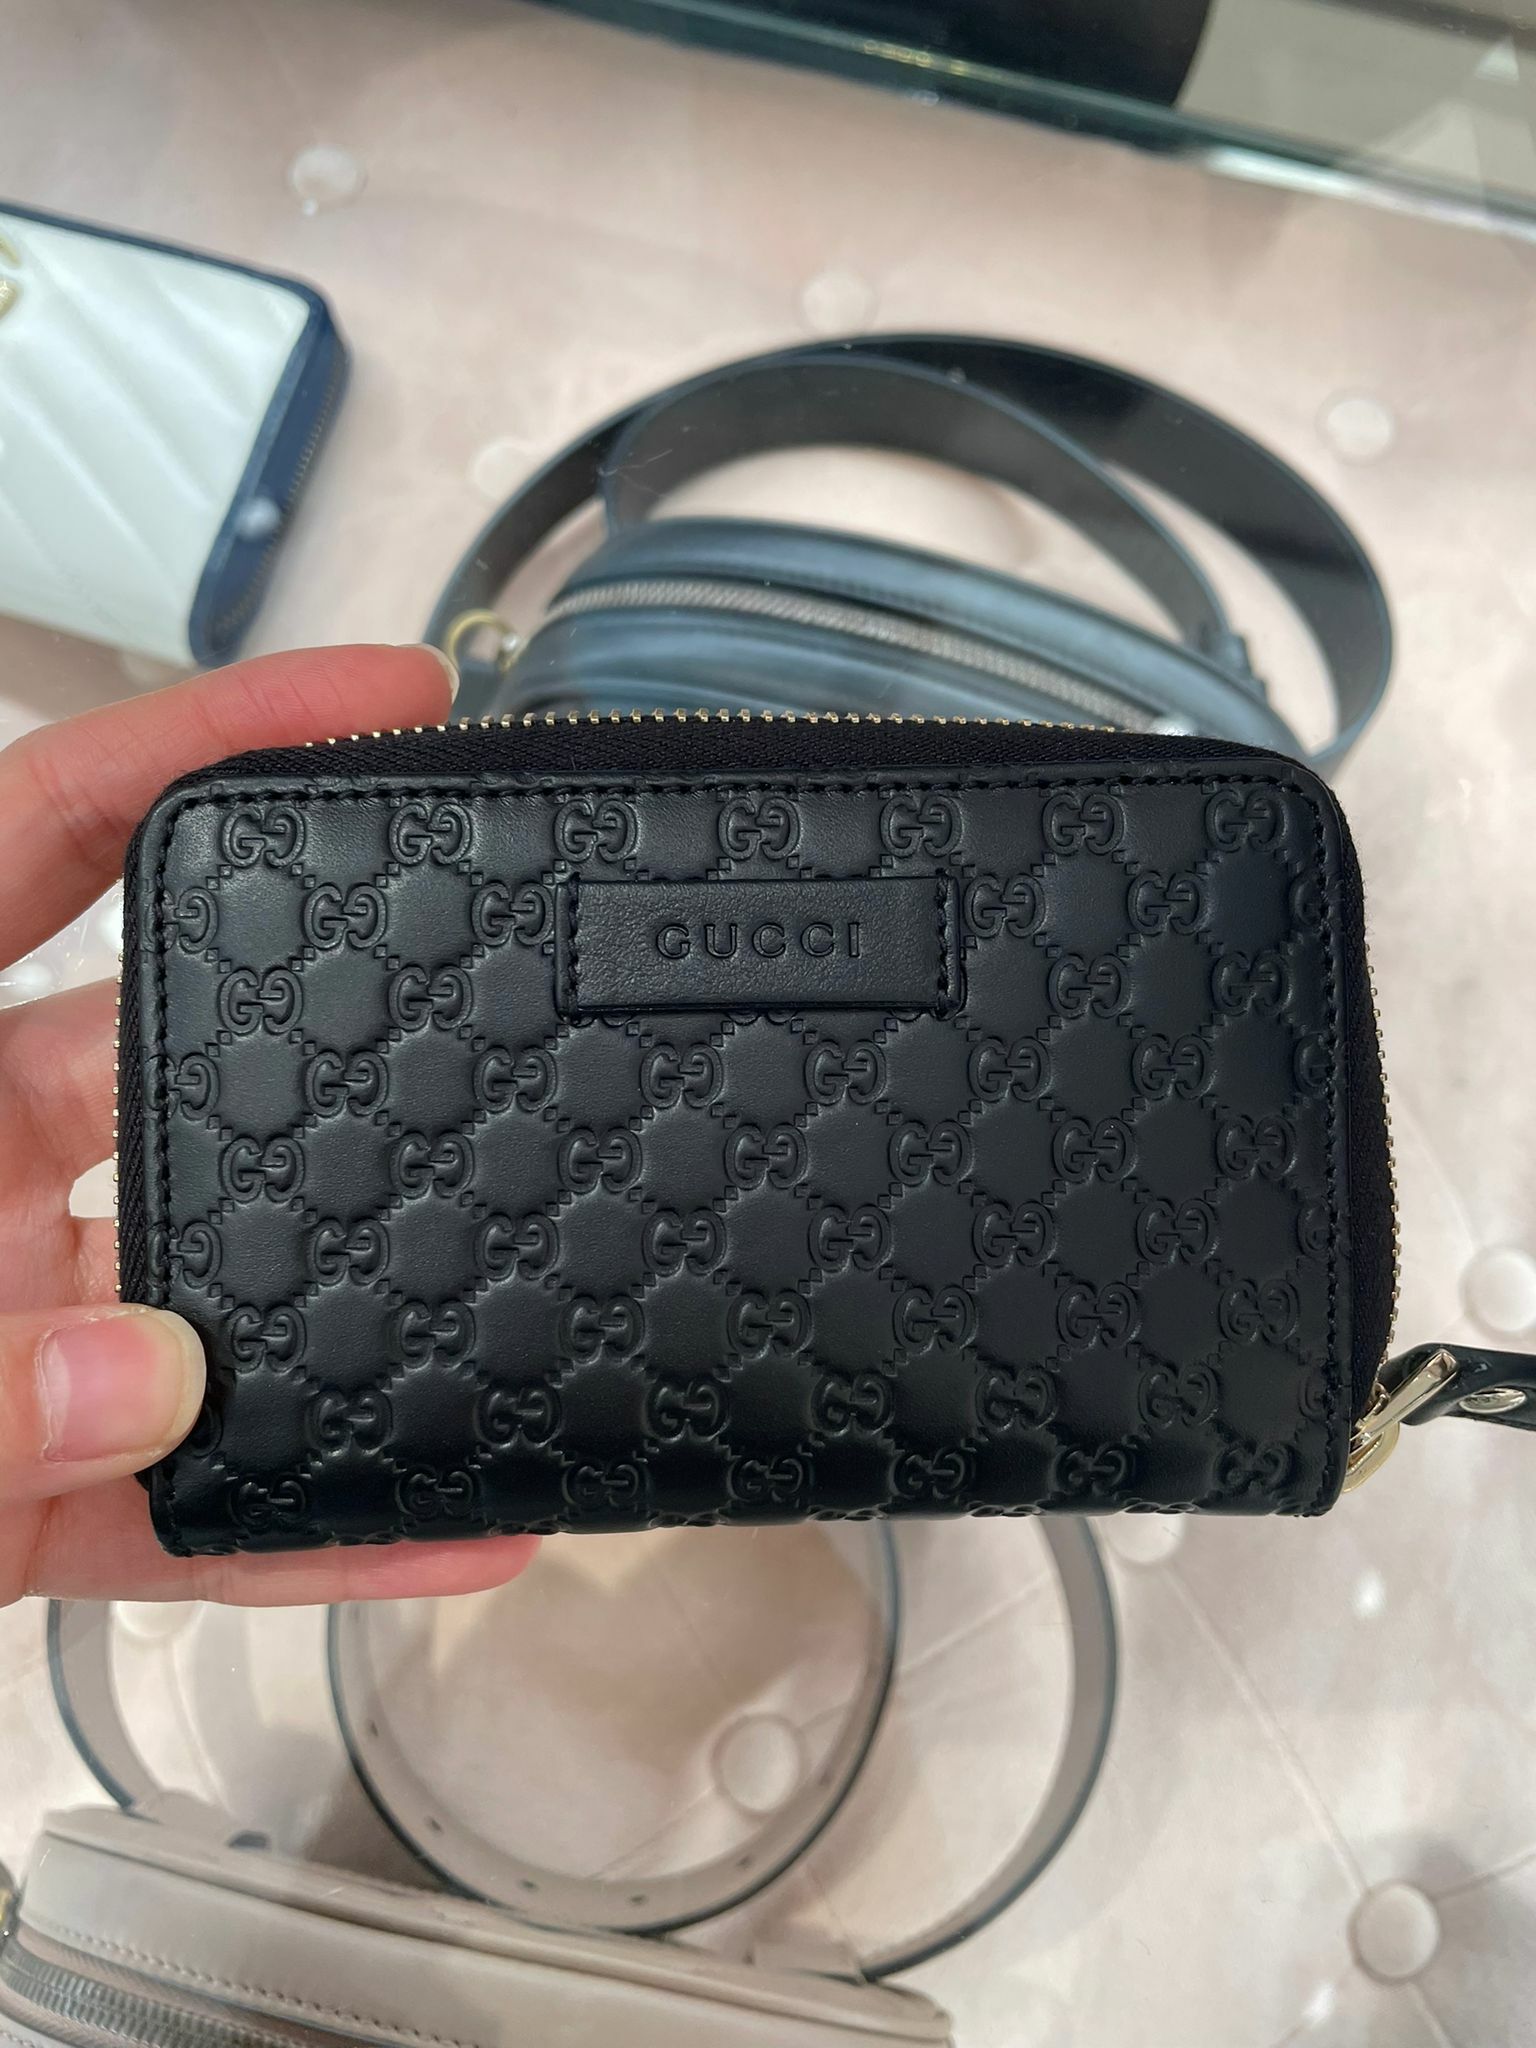 GUCCI CARDHOLDER WITH ZIPPER